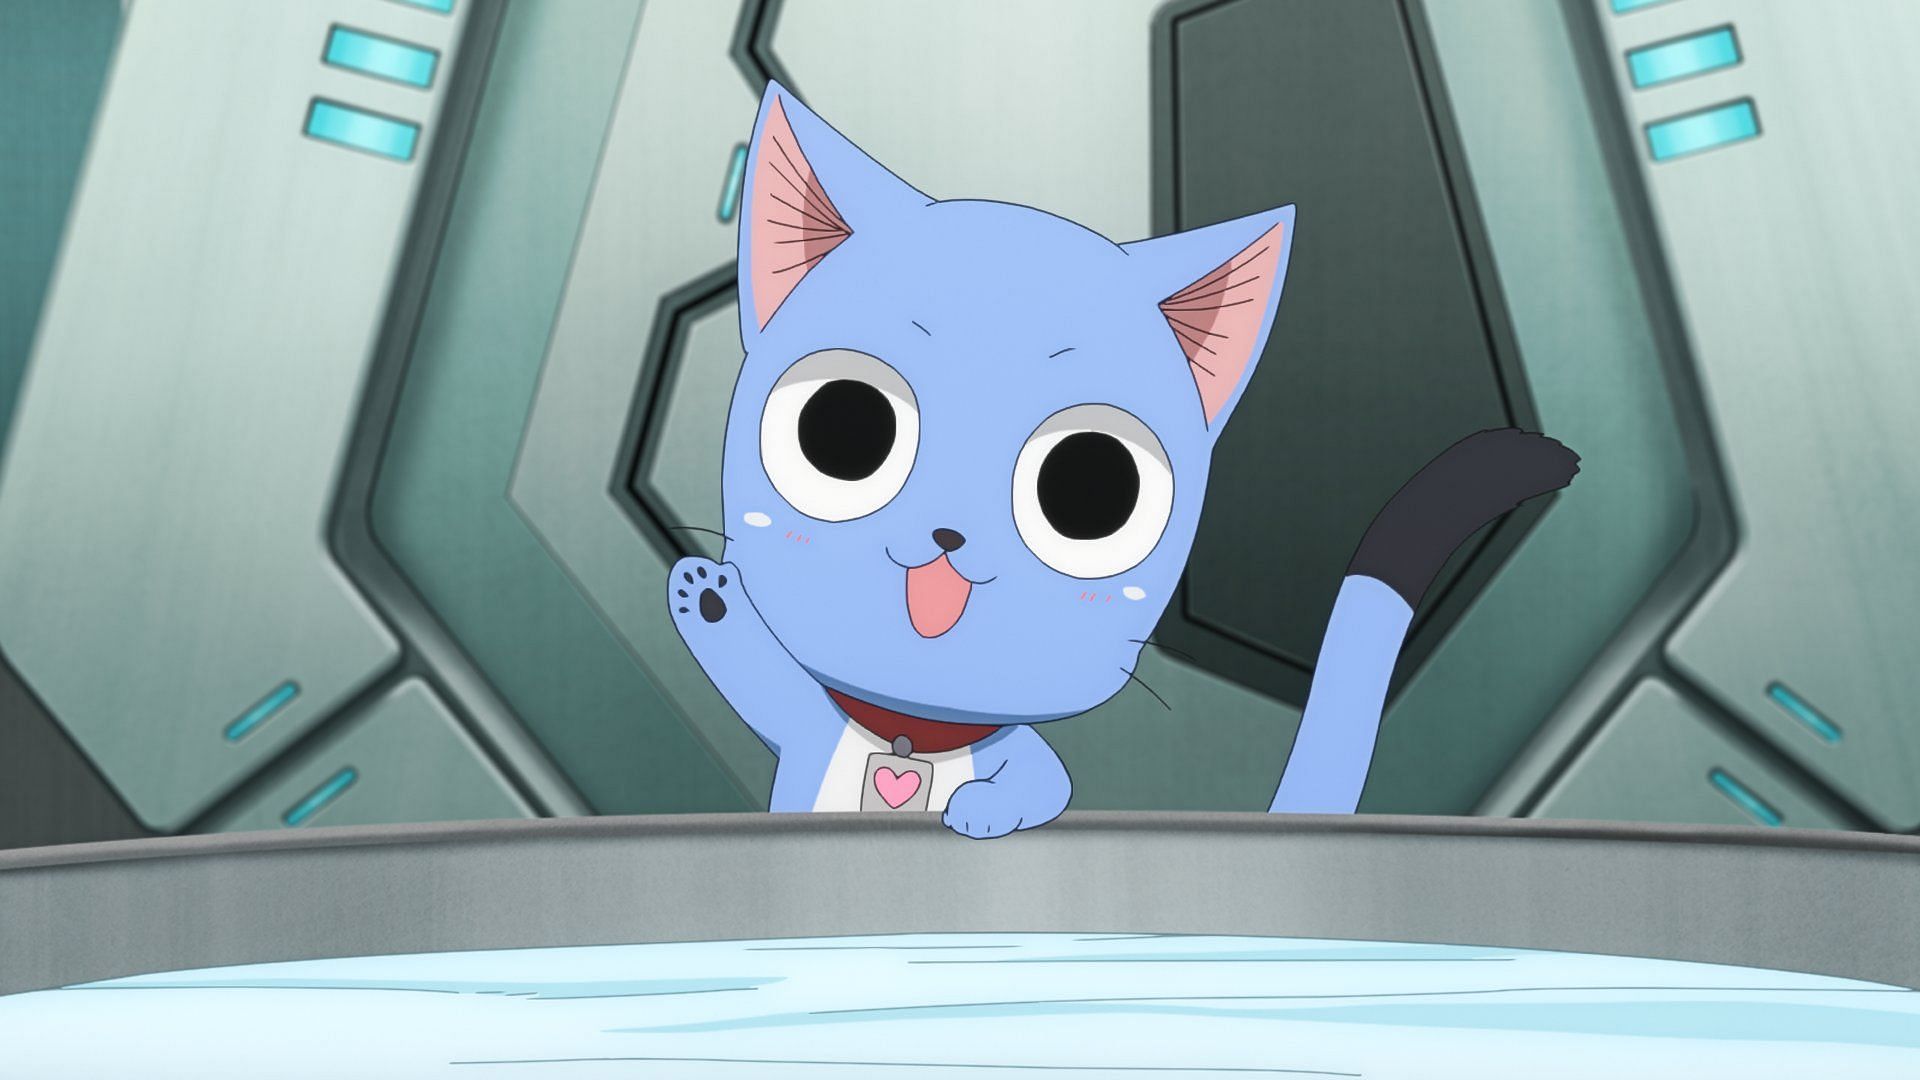 Is Happy From Fairy Tail Really In Edens Zero?